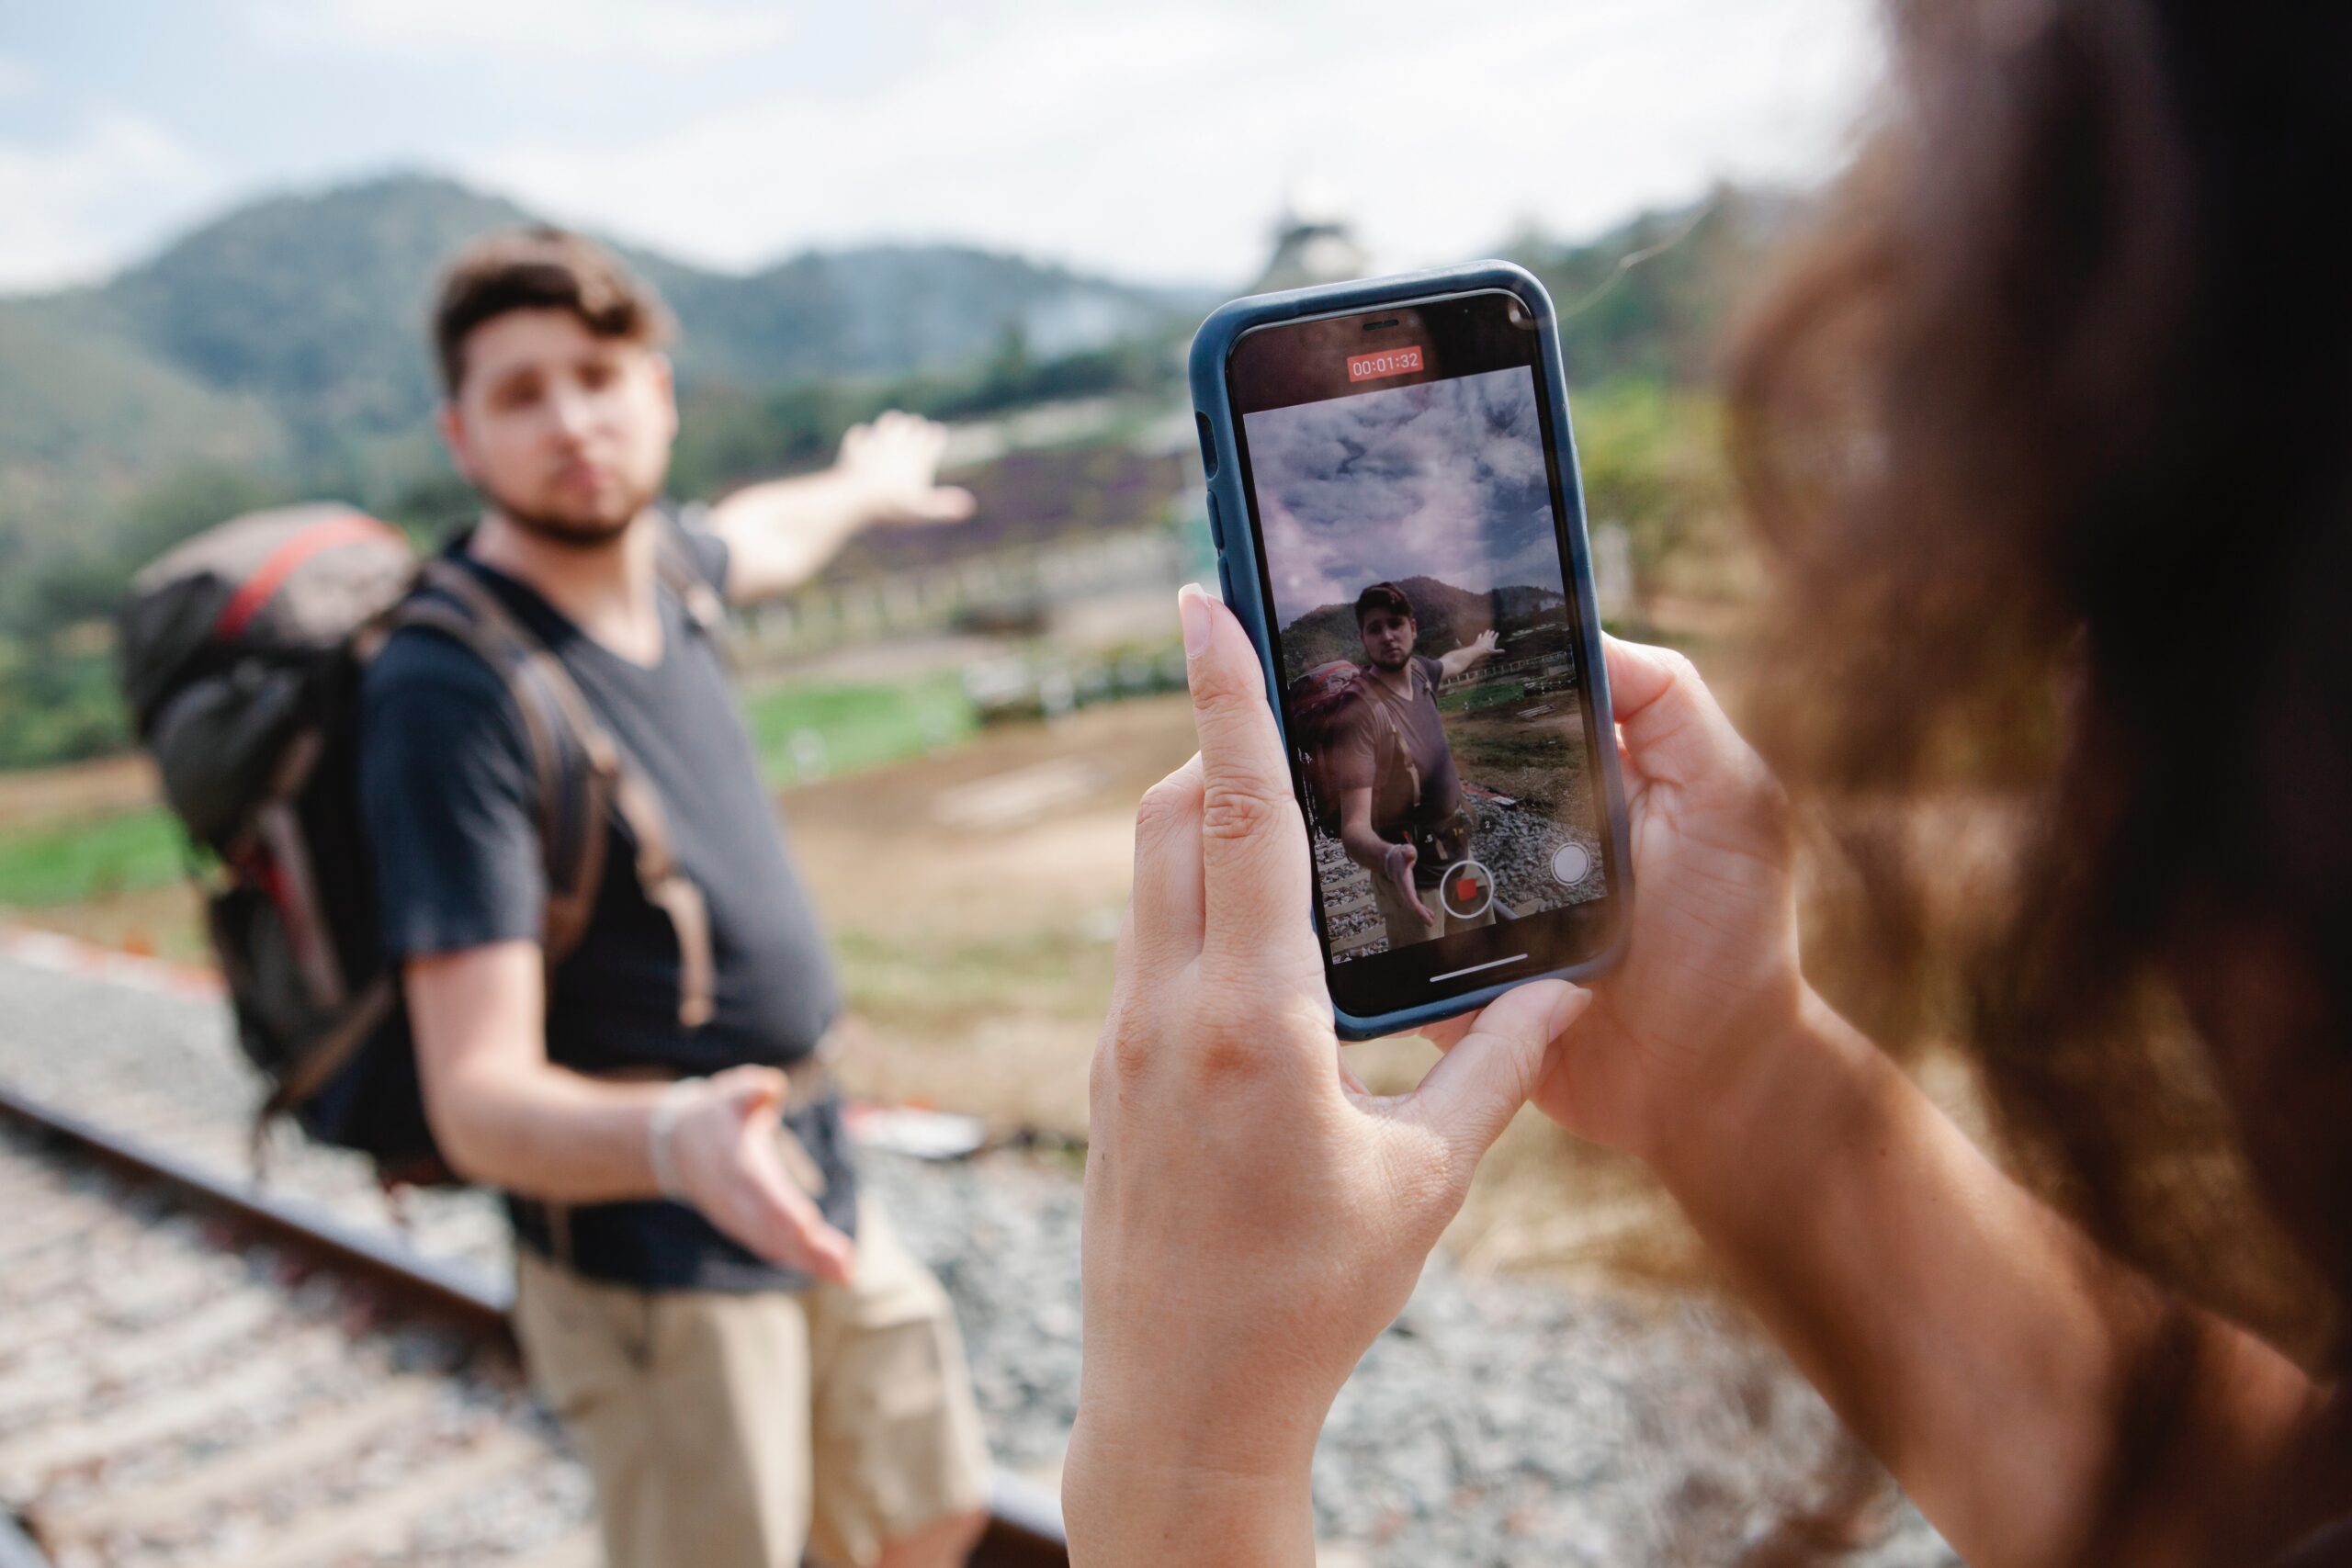 Woman holding phone to take a video of man hiking on a mountain.